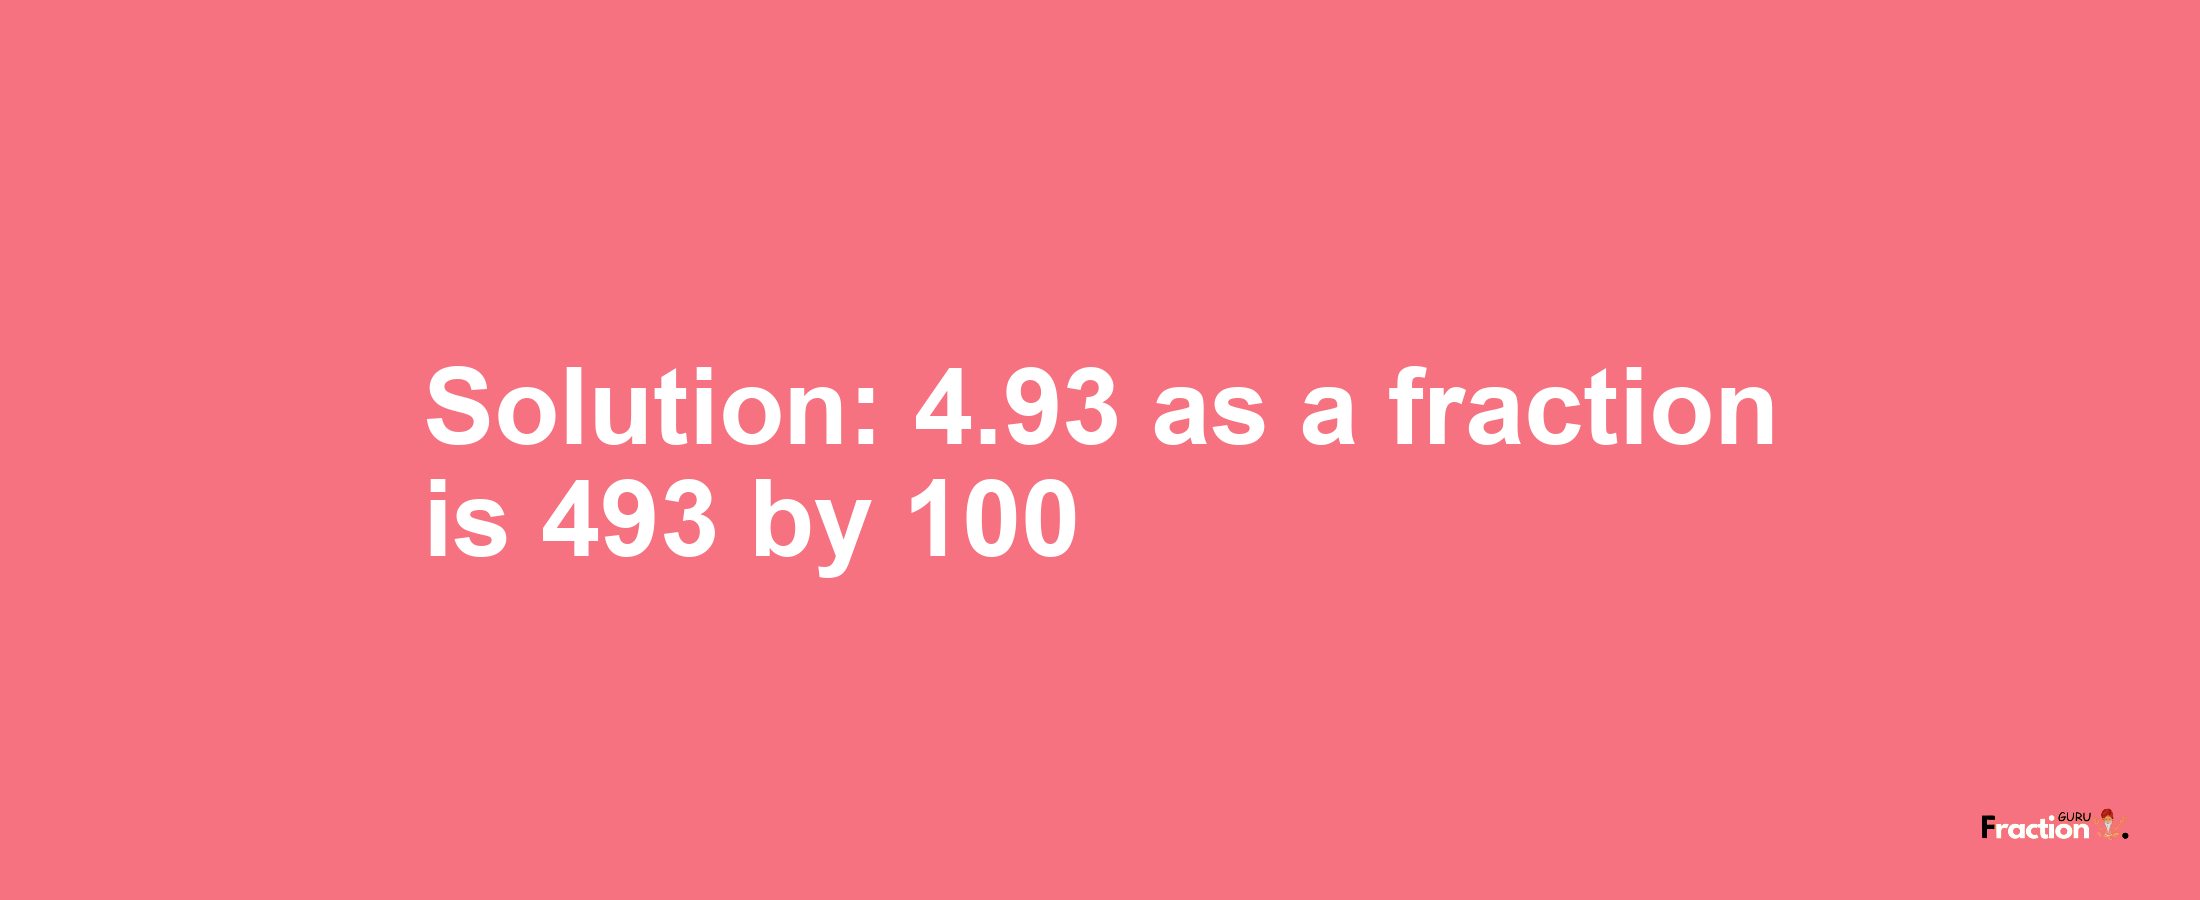 Solution:4.93 as a fraction is 493/100